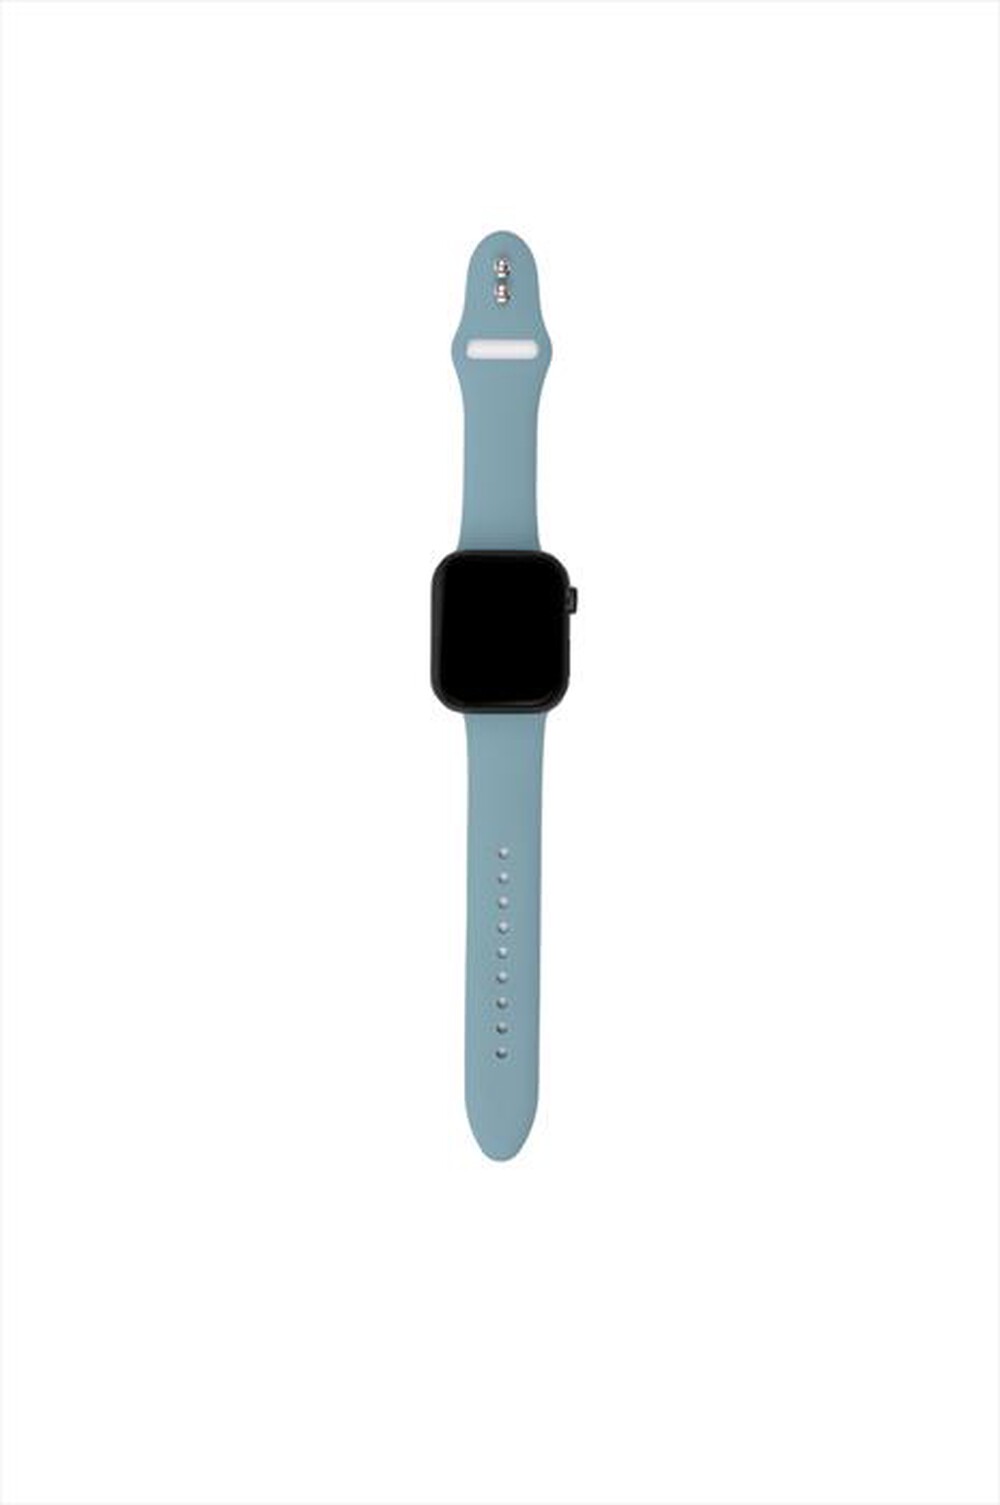 "AAAMAZE - CINTURINO IN SILICONE PER APPLE WATCH 38/40 MM-CACTUS"